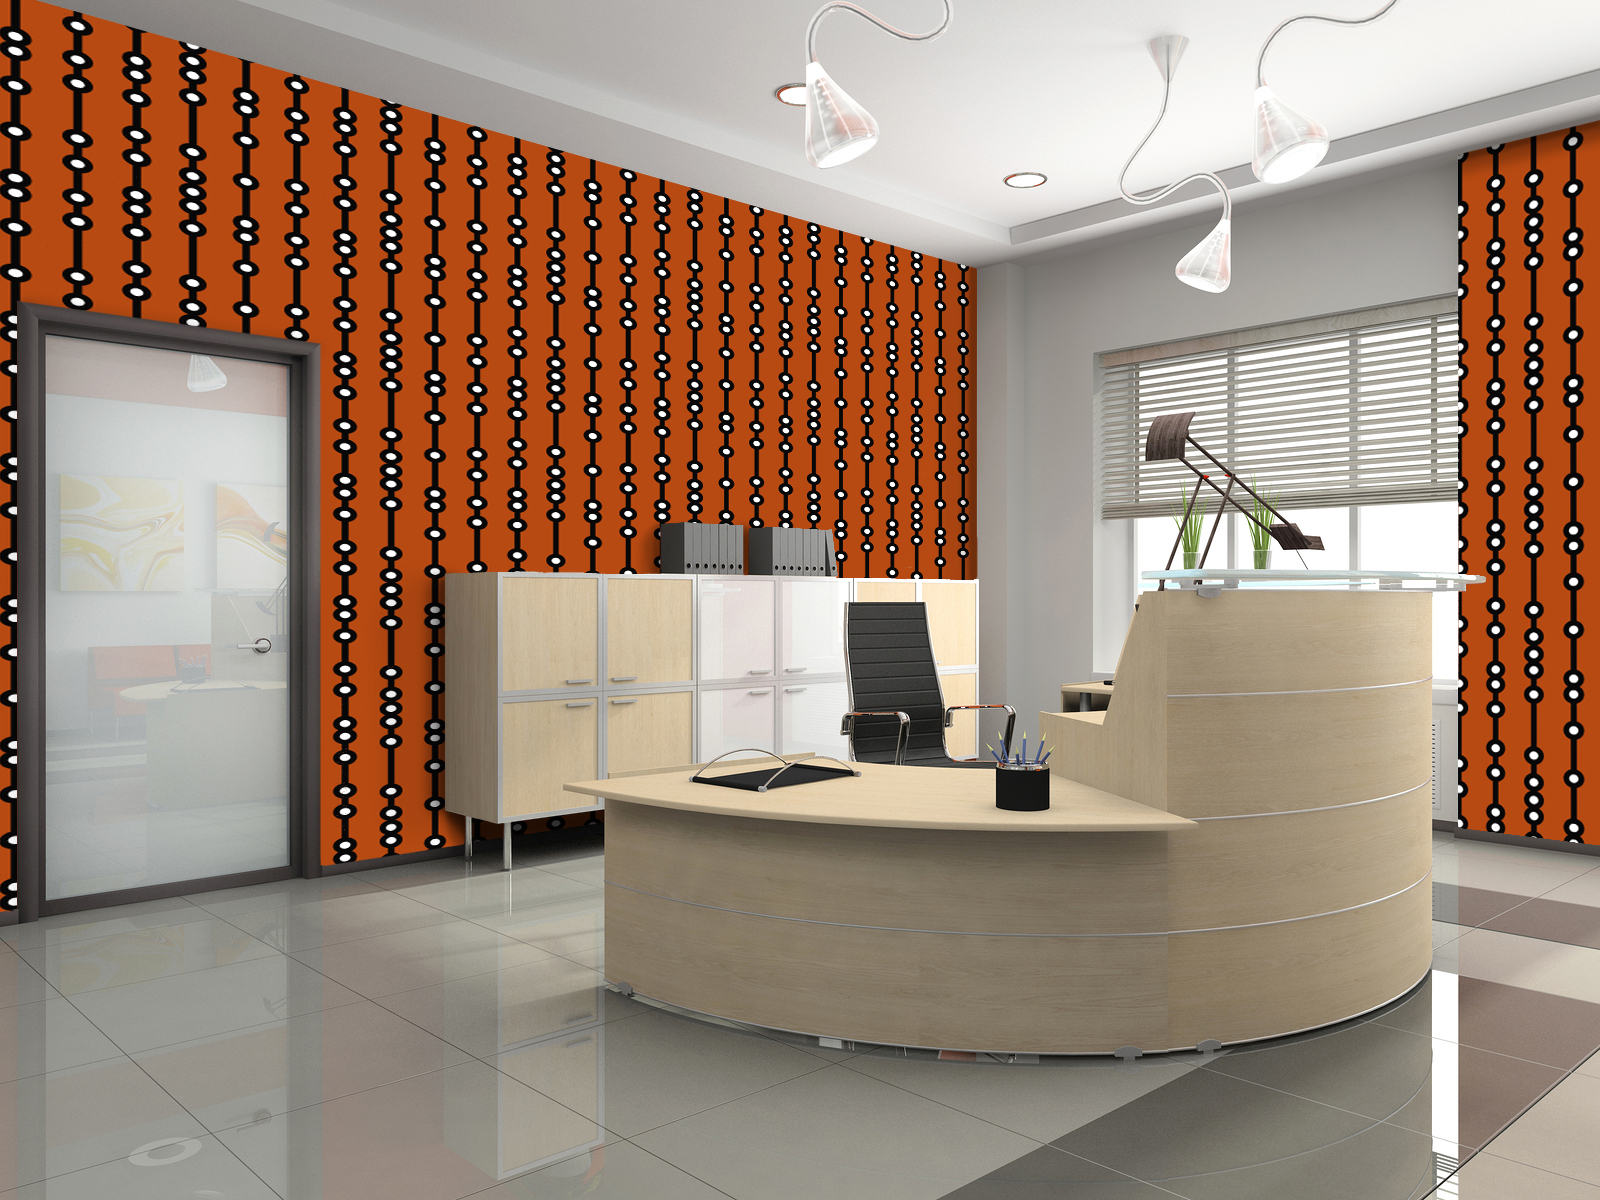 wallpaper design for office wall,interior design,room,property,building,ceiling